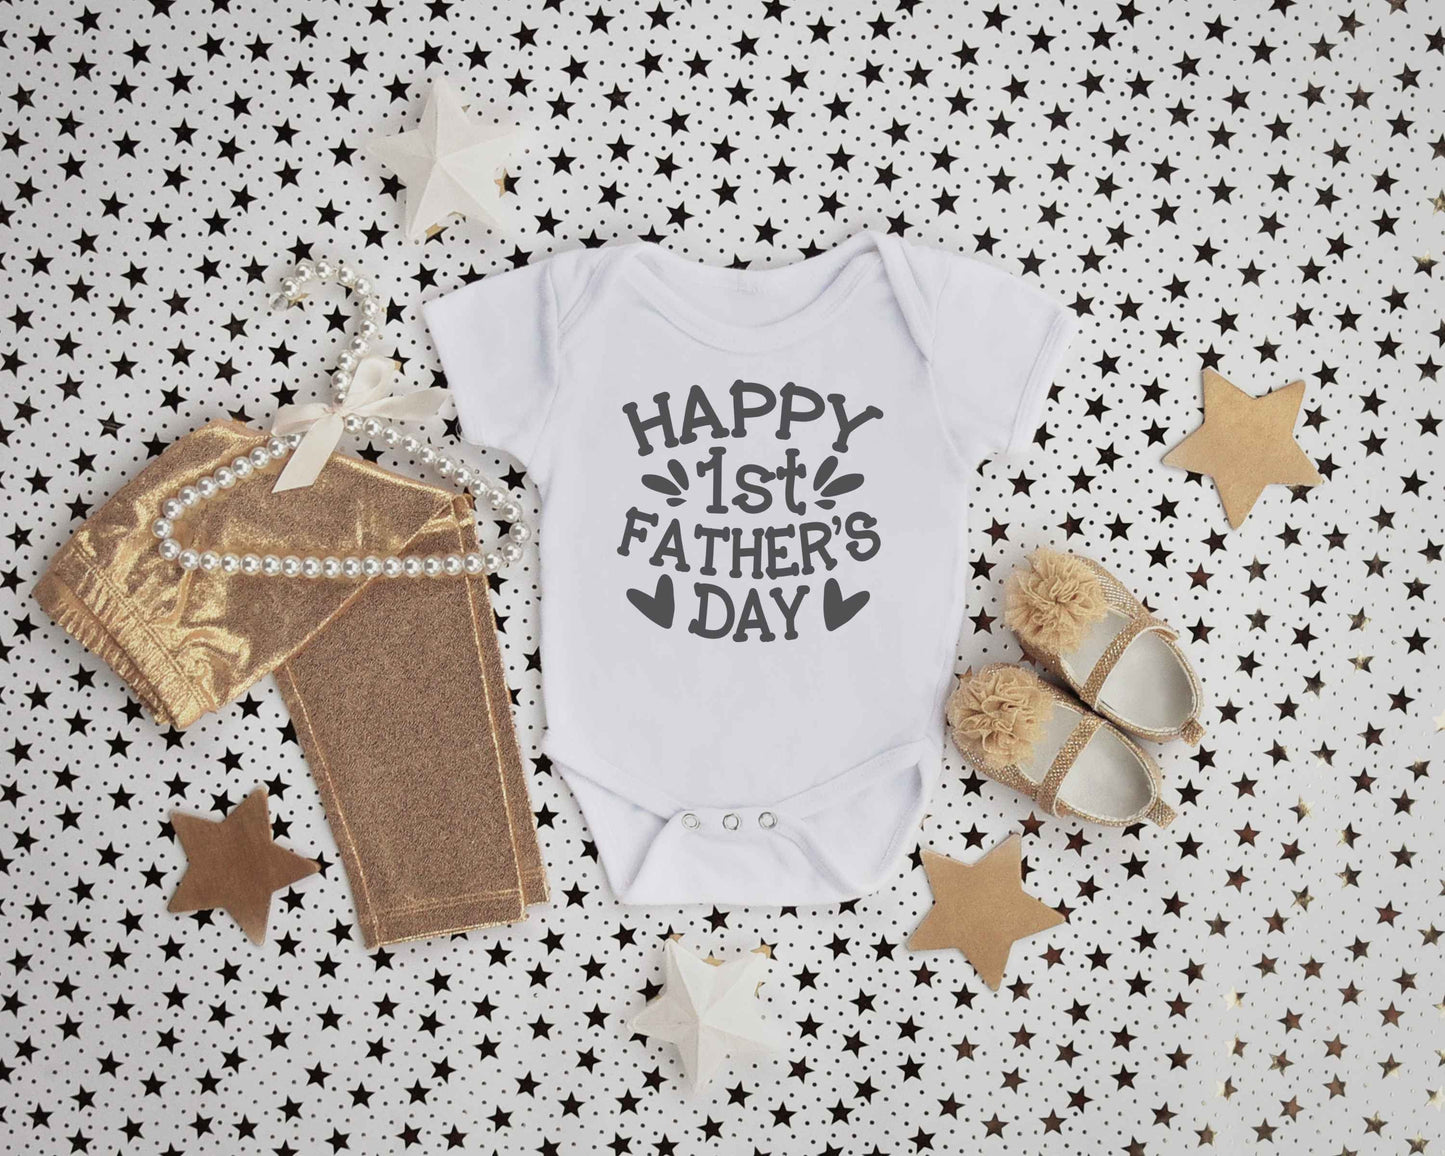 Happy 1st Father's Day Baby Bodysuit - Gift for new dad